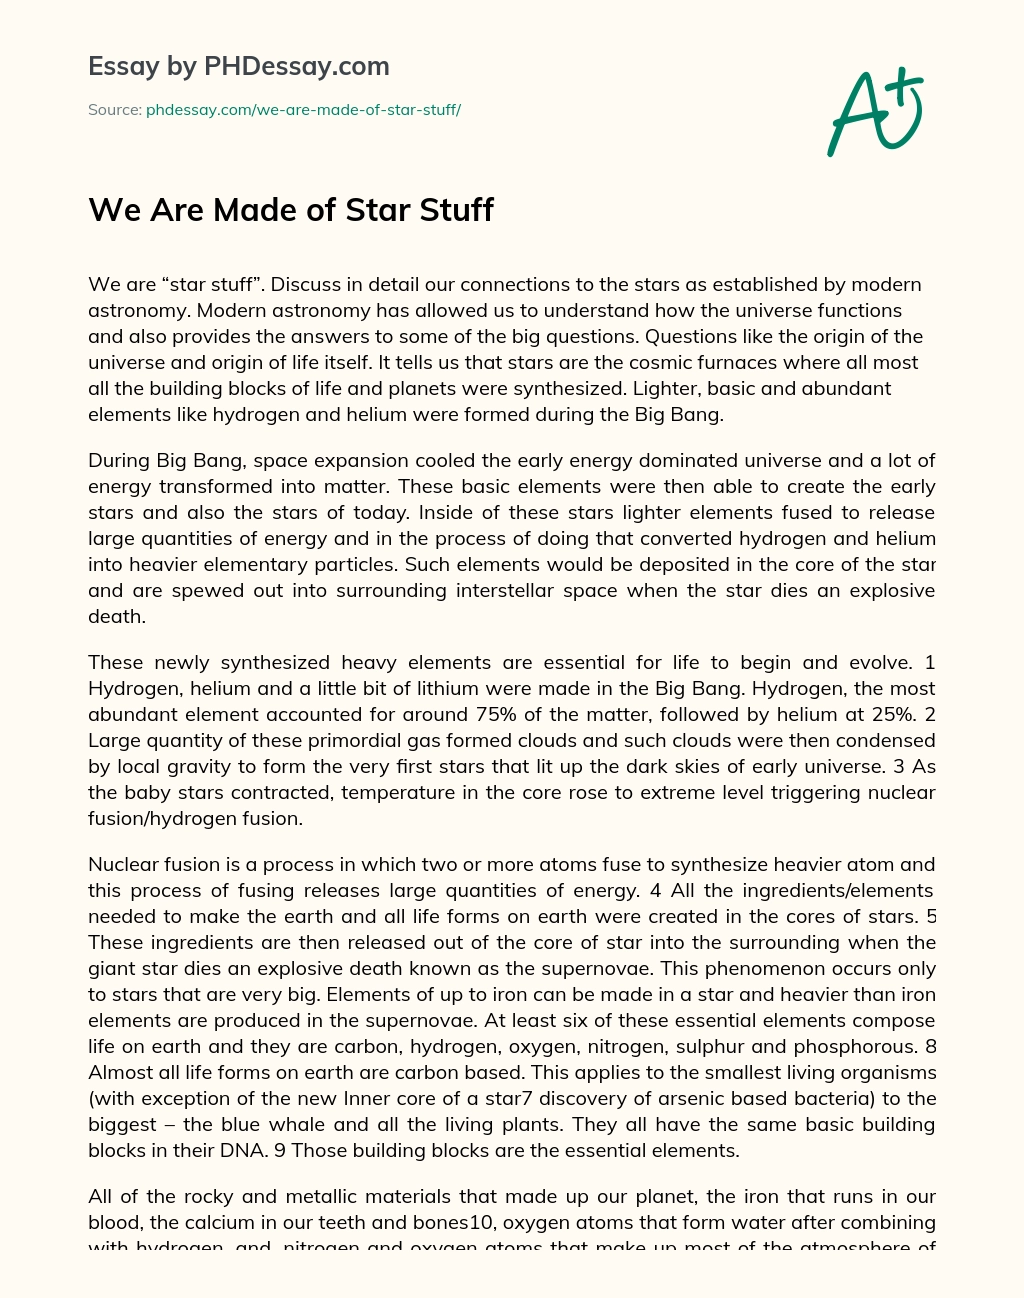 We Are Made of Star Stuff essay